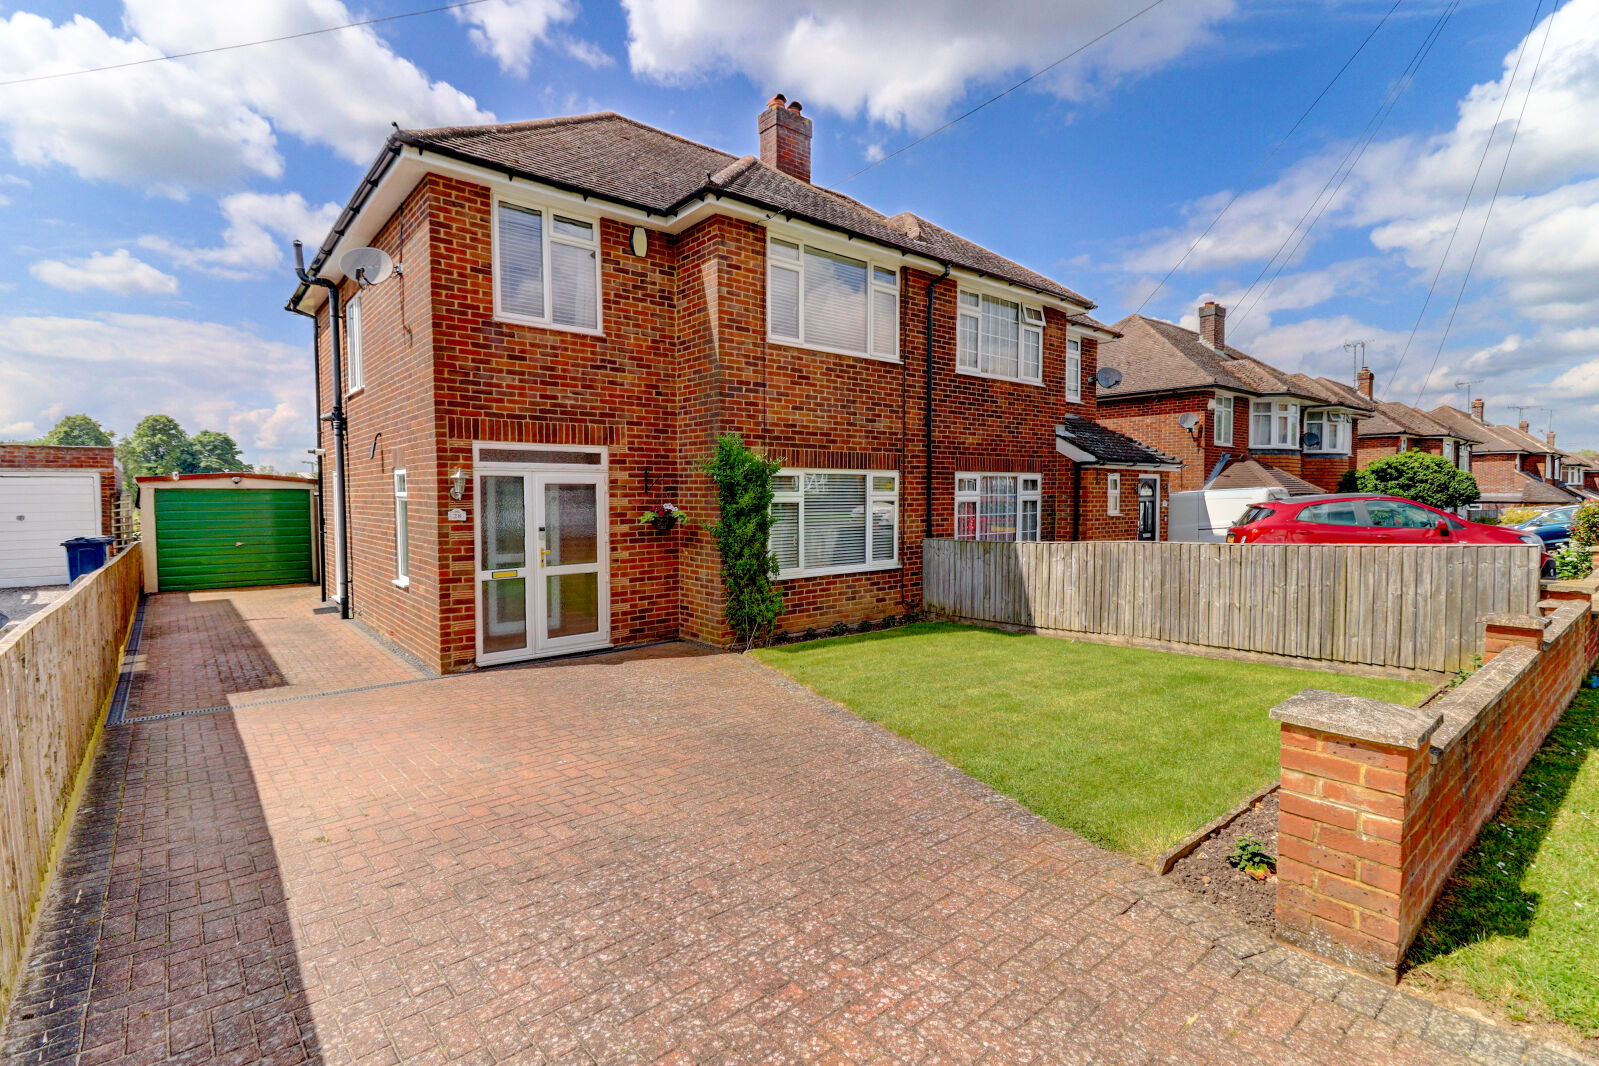 3 bedroom semi detached house for sale Ellsworth Road, High Wycombe, HP11, main image